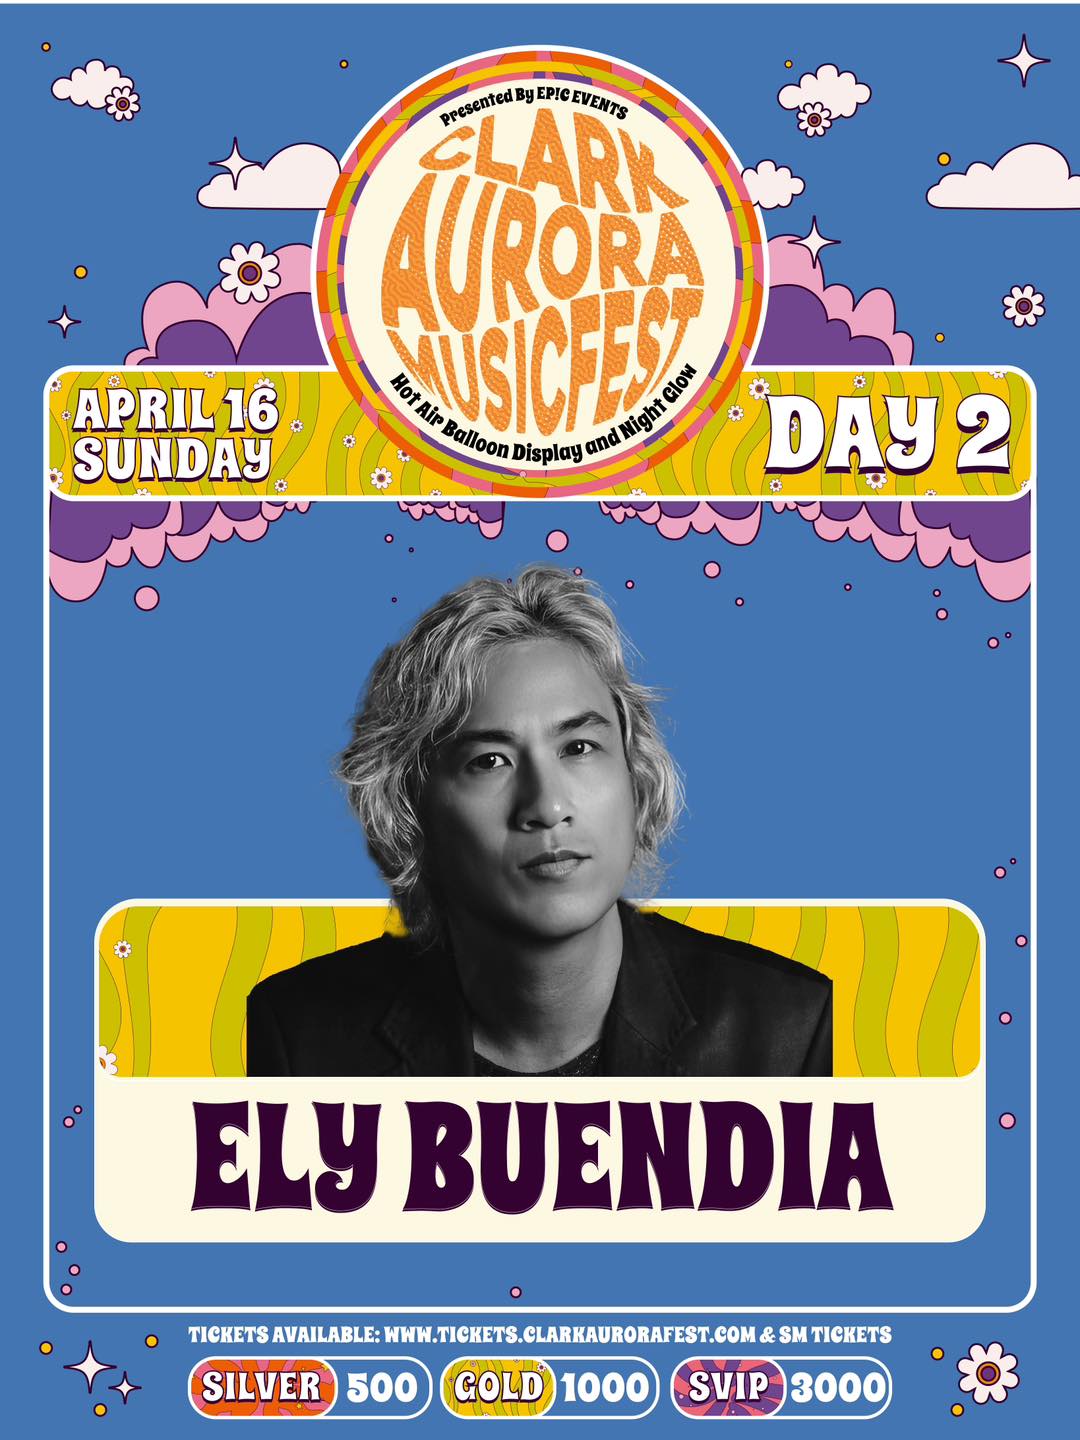 AURORA-MUSIC-FESTIVAL-DAY-2-WITH-ELY-BUENDIA-IS-ALMOST-SOLD-OUT